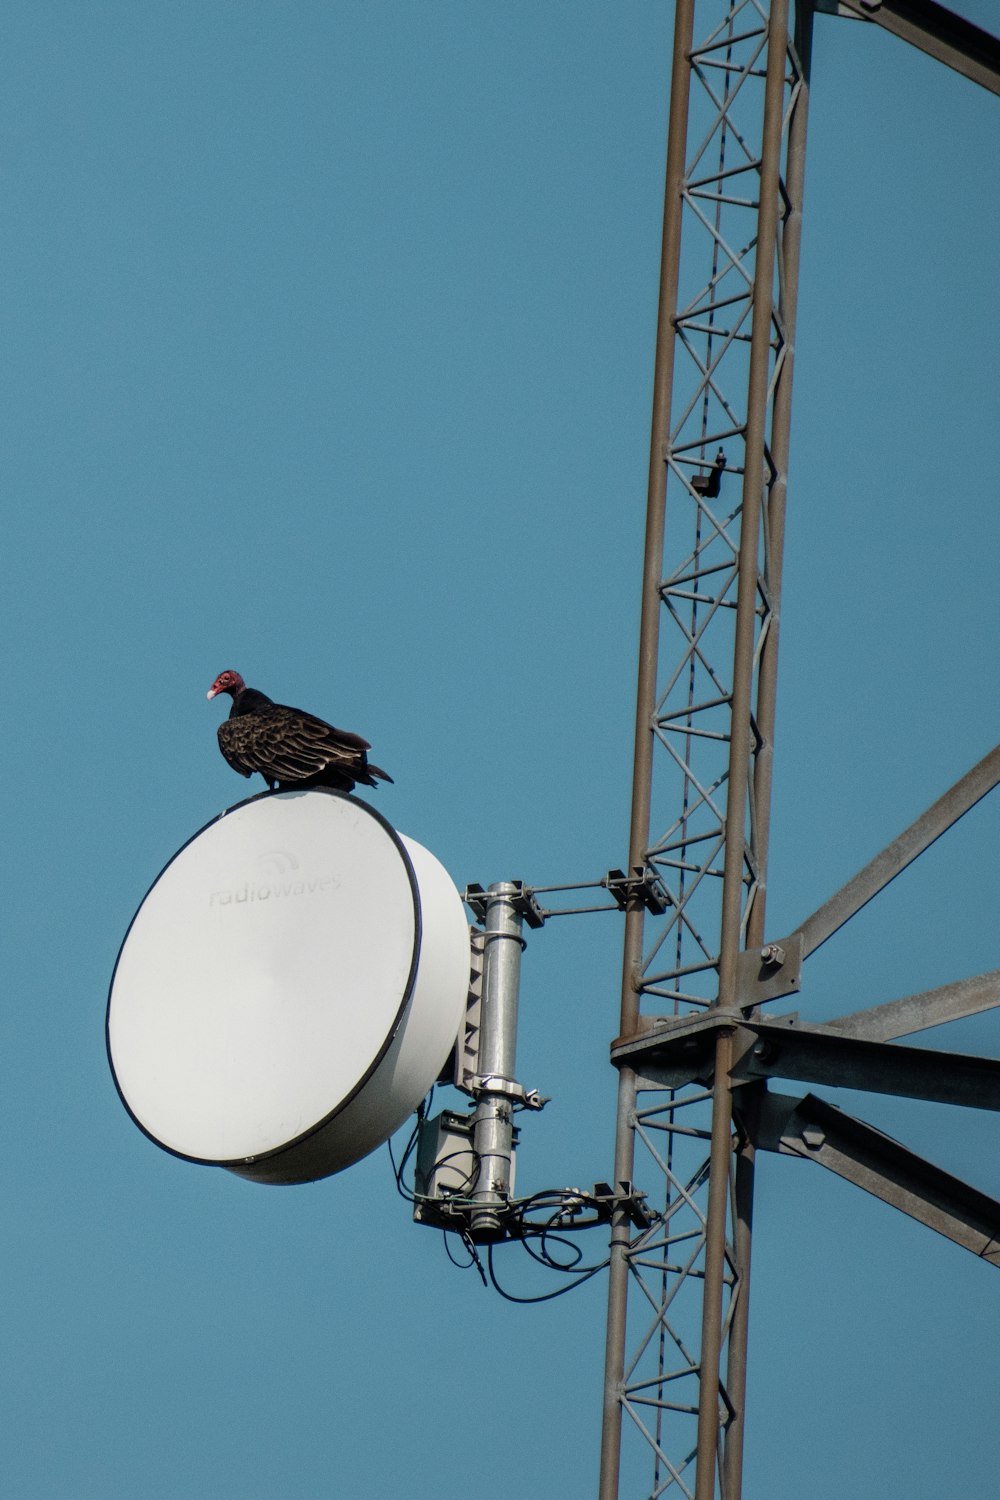 a bird sitting on top of a satellite dish